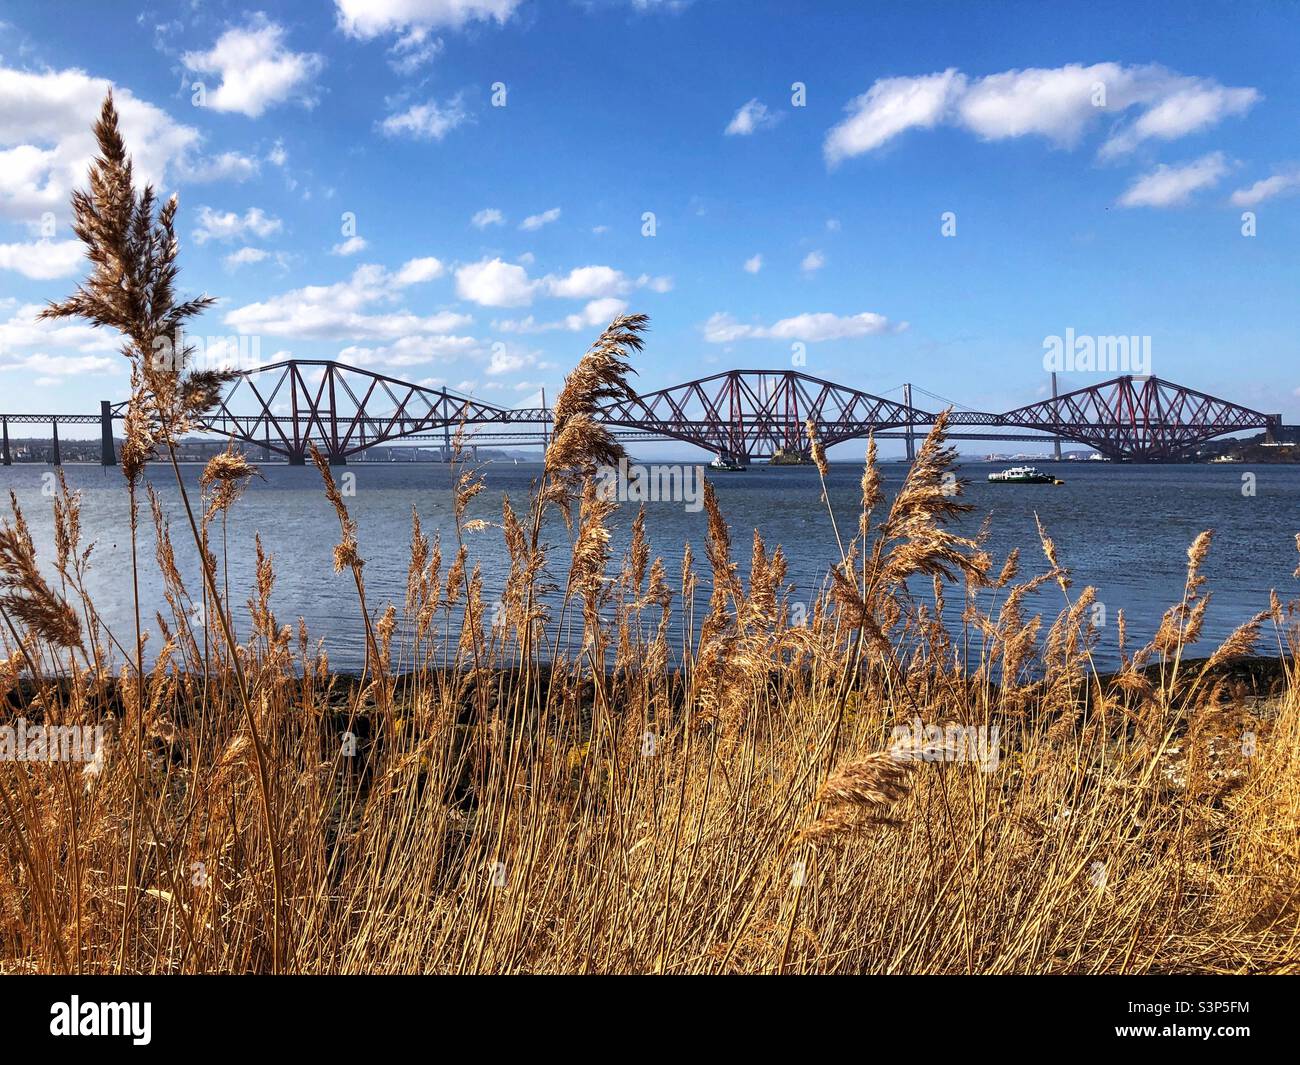 View through the reeds at the Firth of Forth estuary with a view of the Forth bridge, Scotland Stock Photo